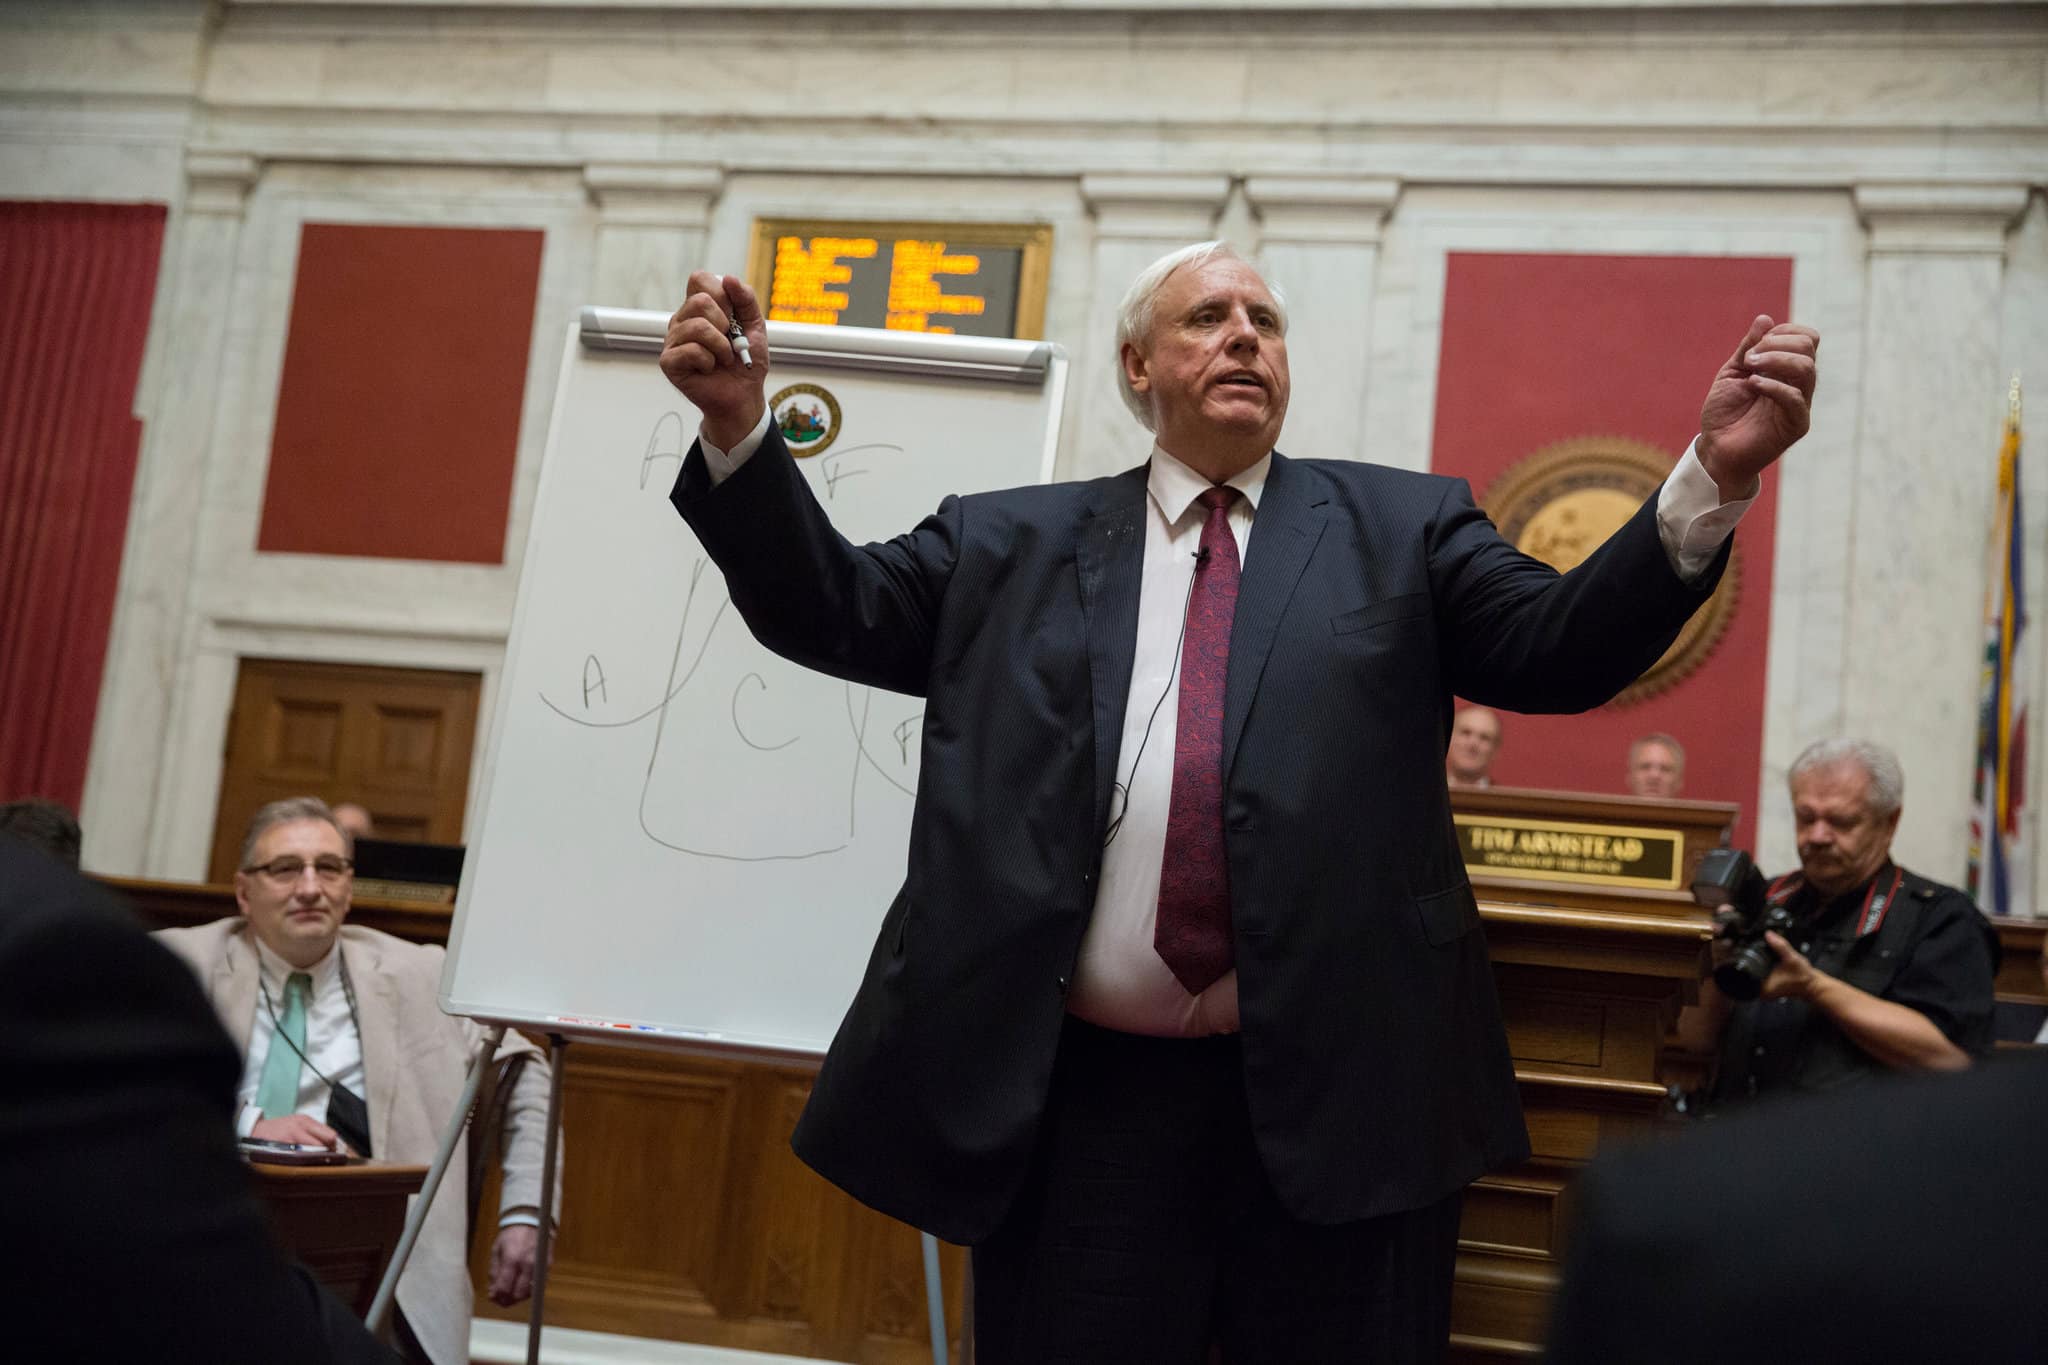 Jim Justice Announces When Bars in Monongalia County Can Reopen